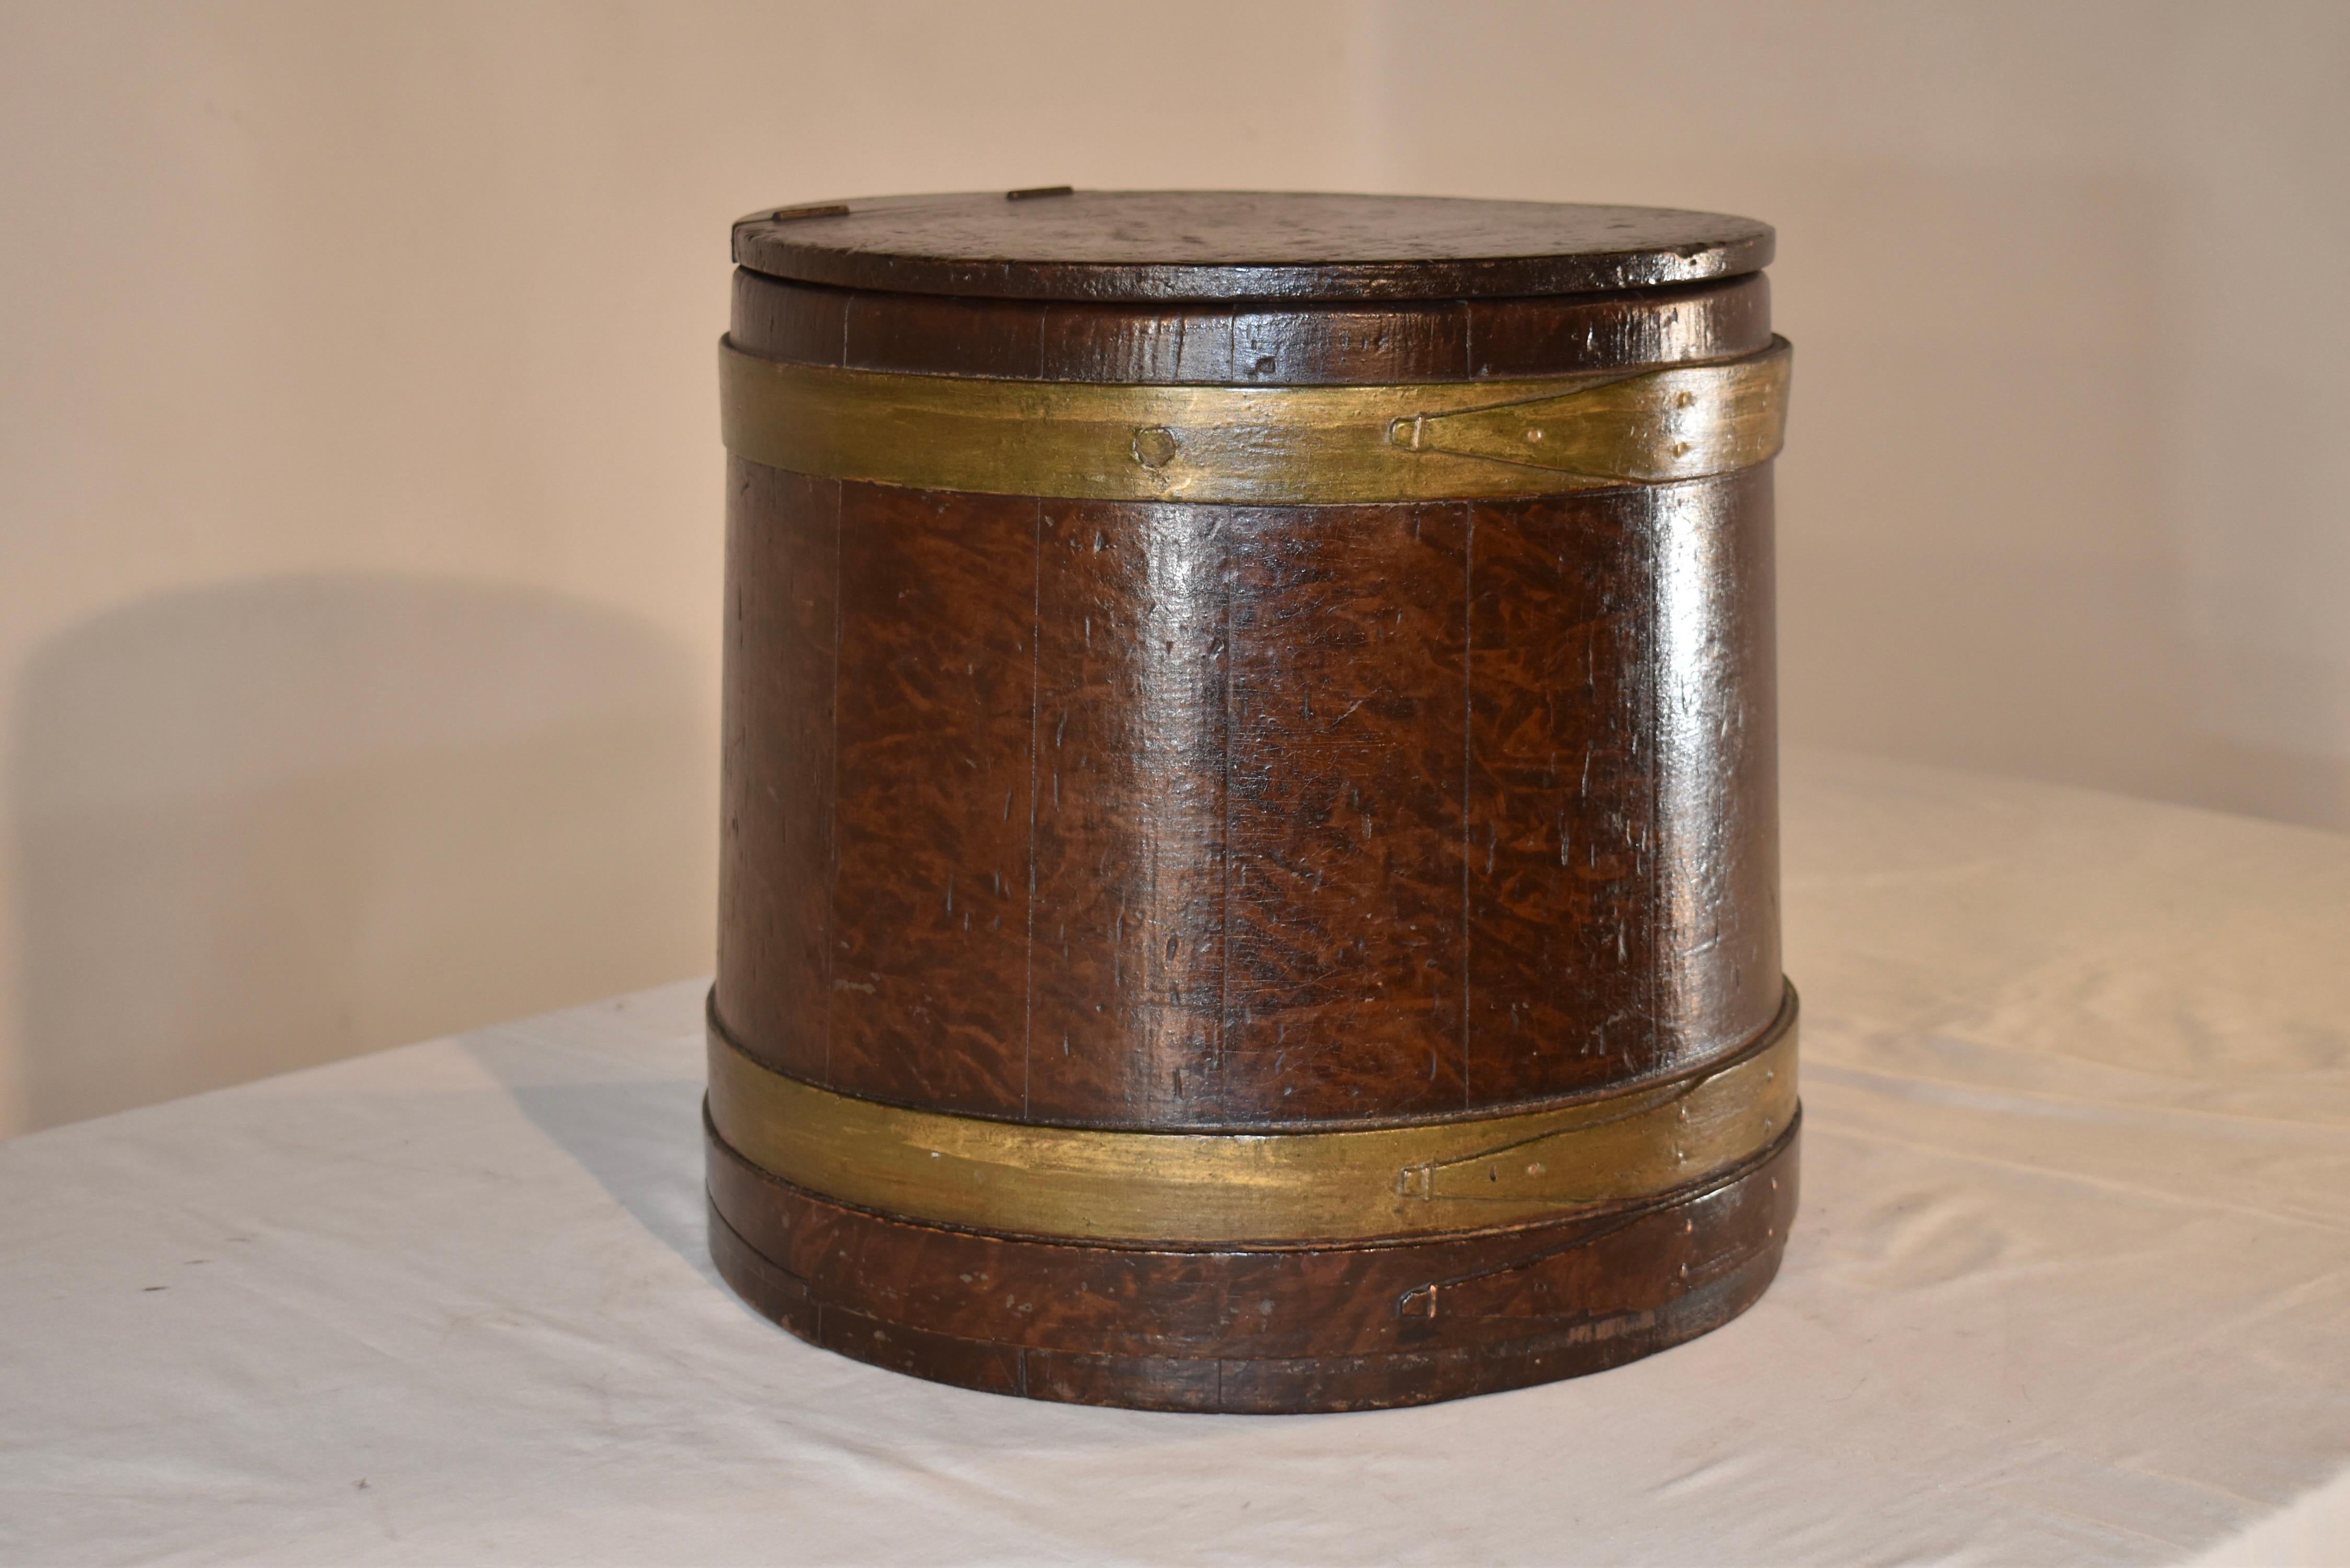 19th century American lidded box.  The box is circular and is grain painted to look like burl wood.  The box is banded with wrapped wooden straps, hand painted in god to have the look of brass.  The box has a hinged lid which lifts to reveal